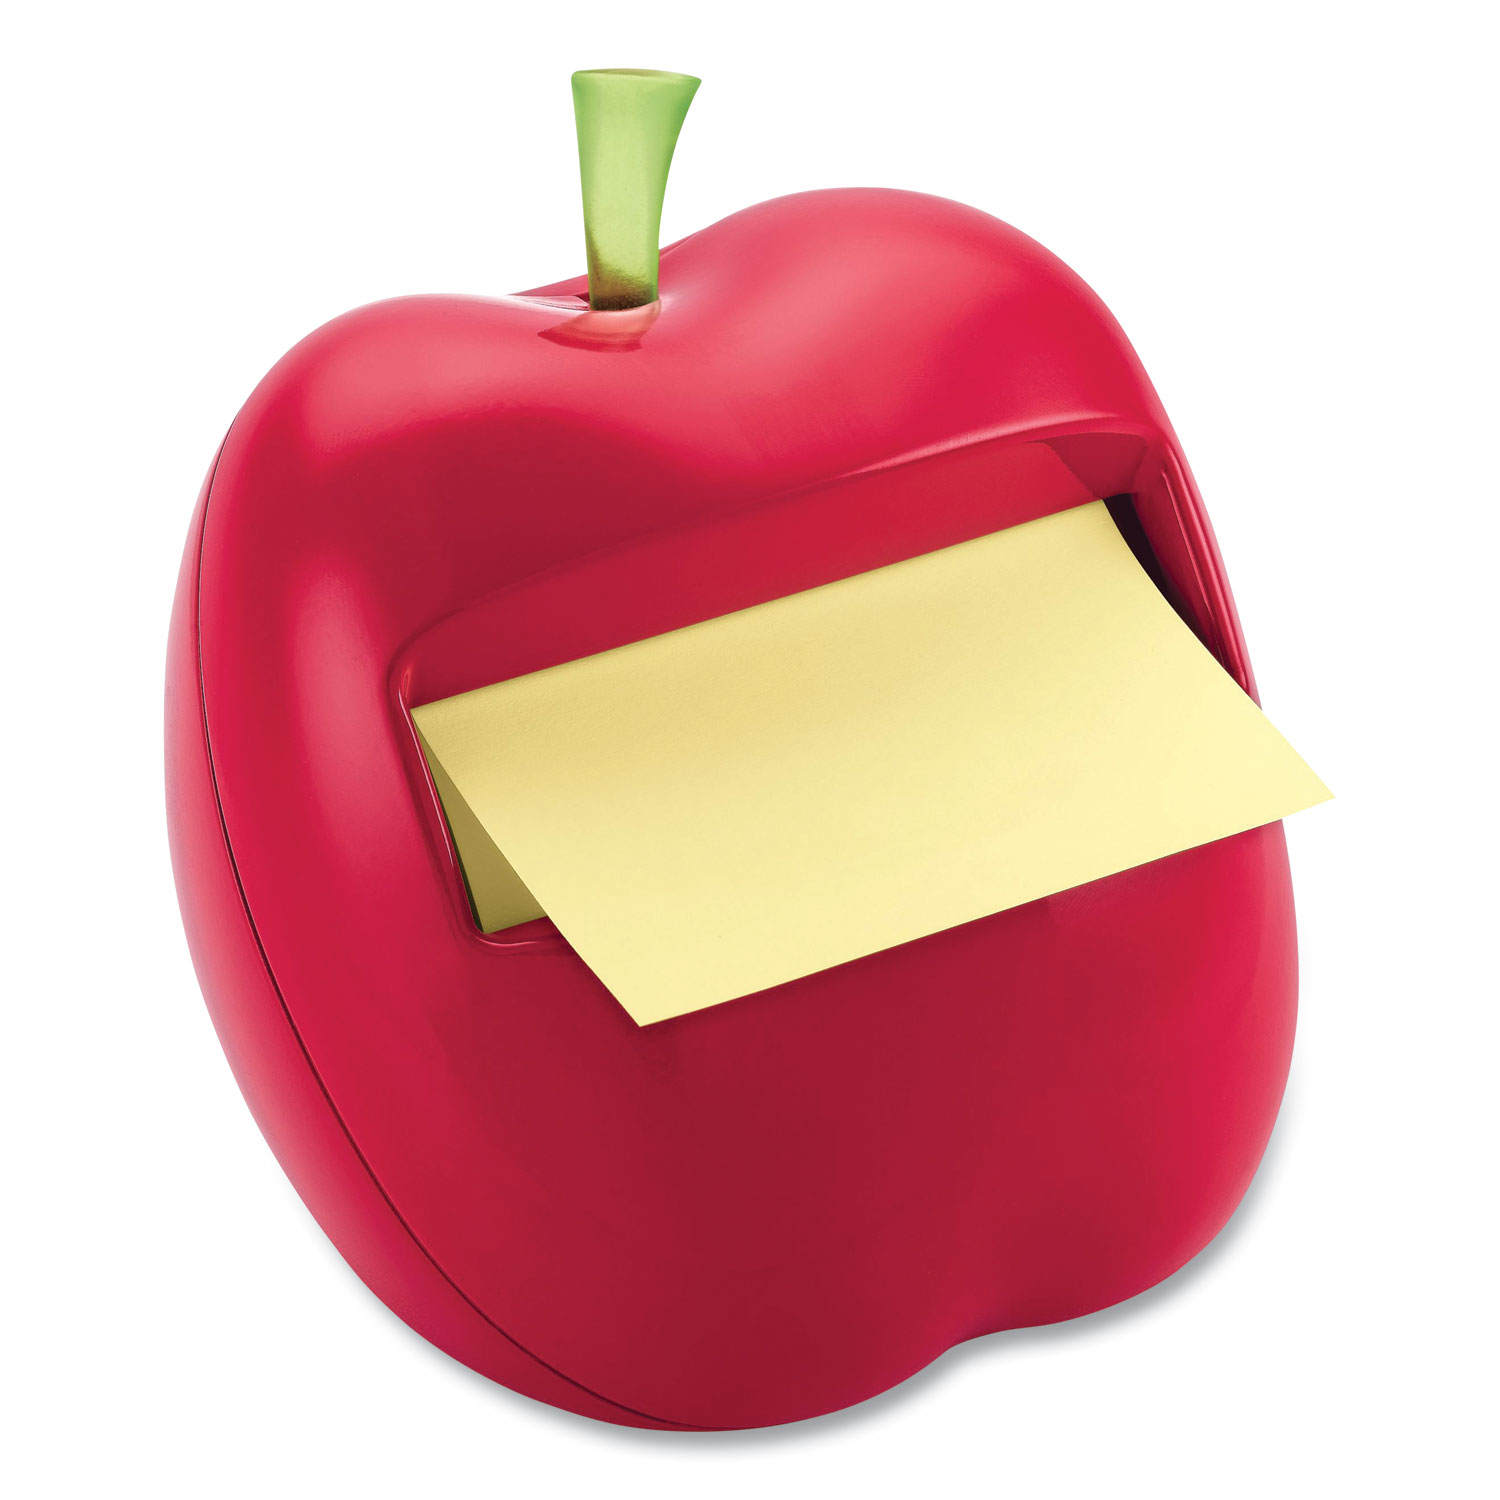 Post-it® Pop-up Notes Apple-Shaped Dispenser for 3 x 3 Self-Stick Pads, Red